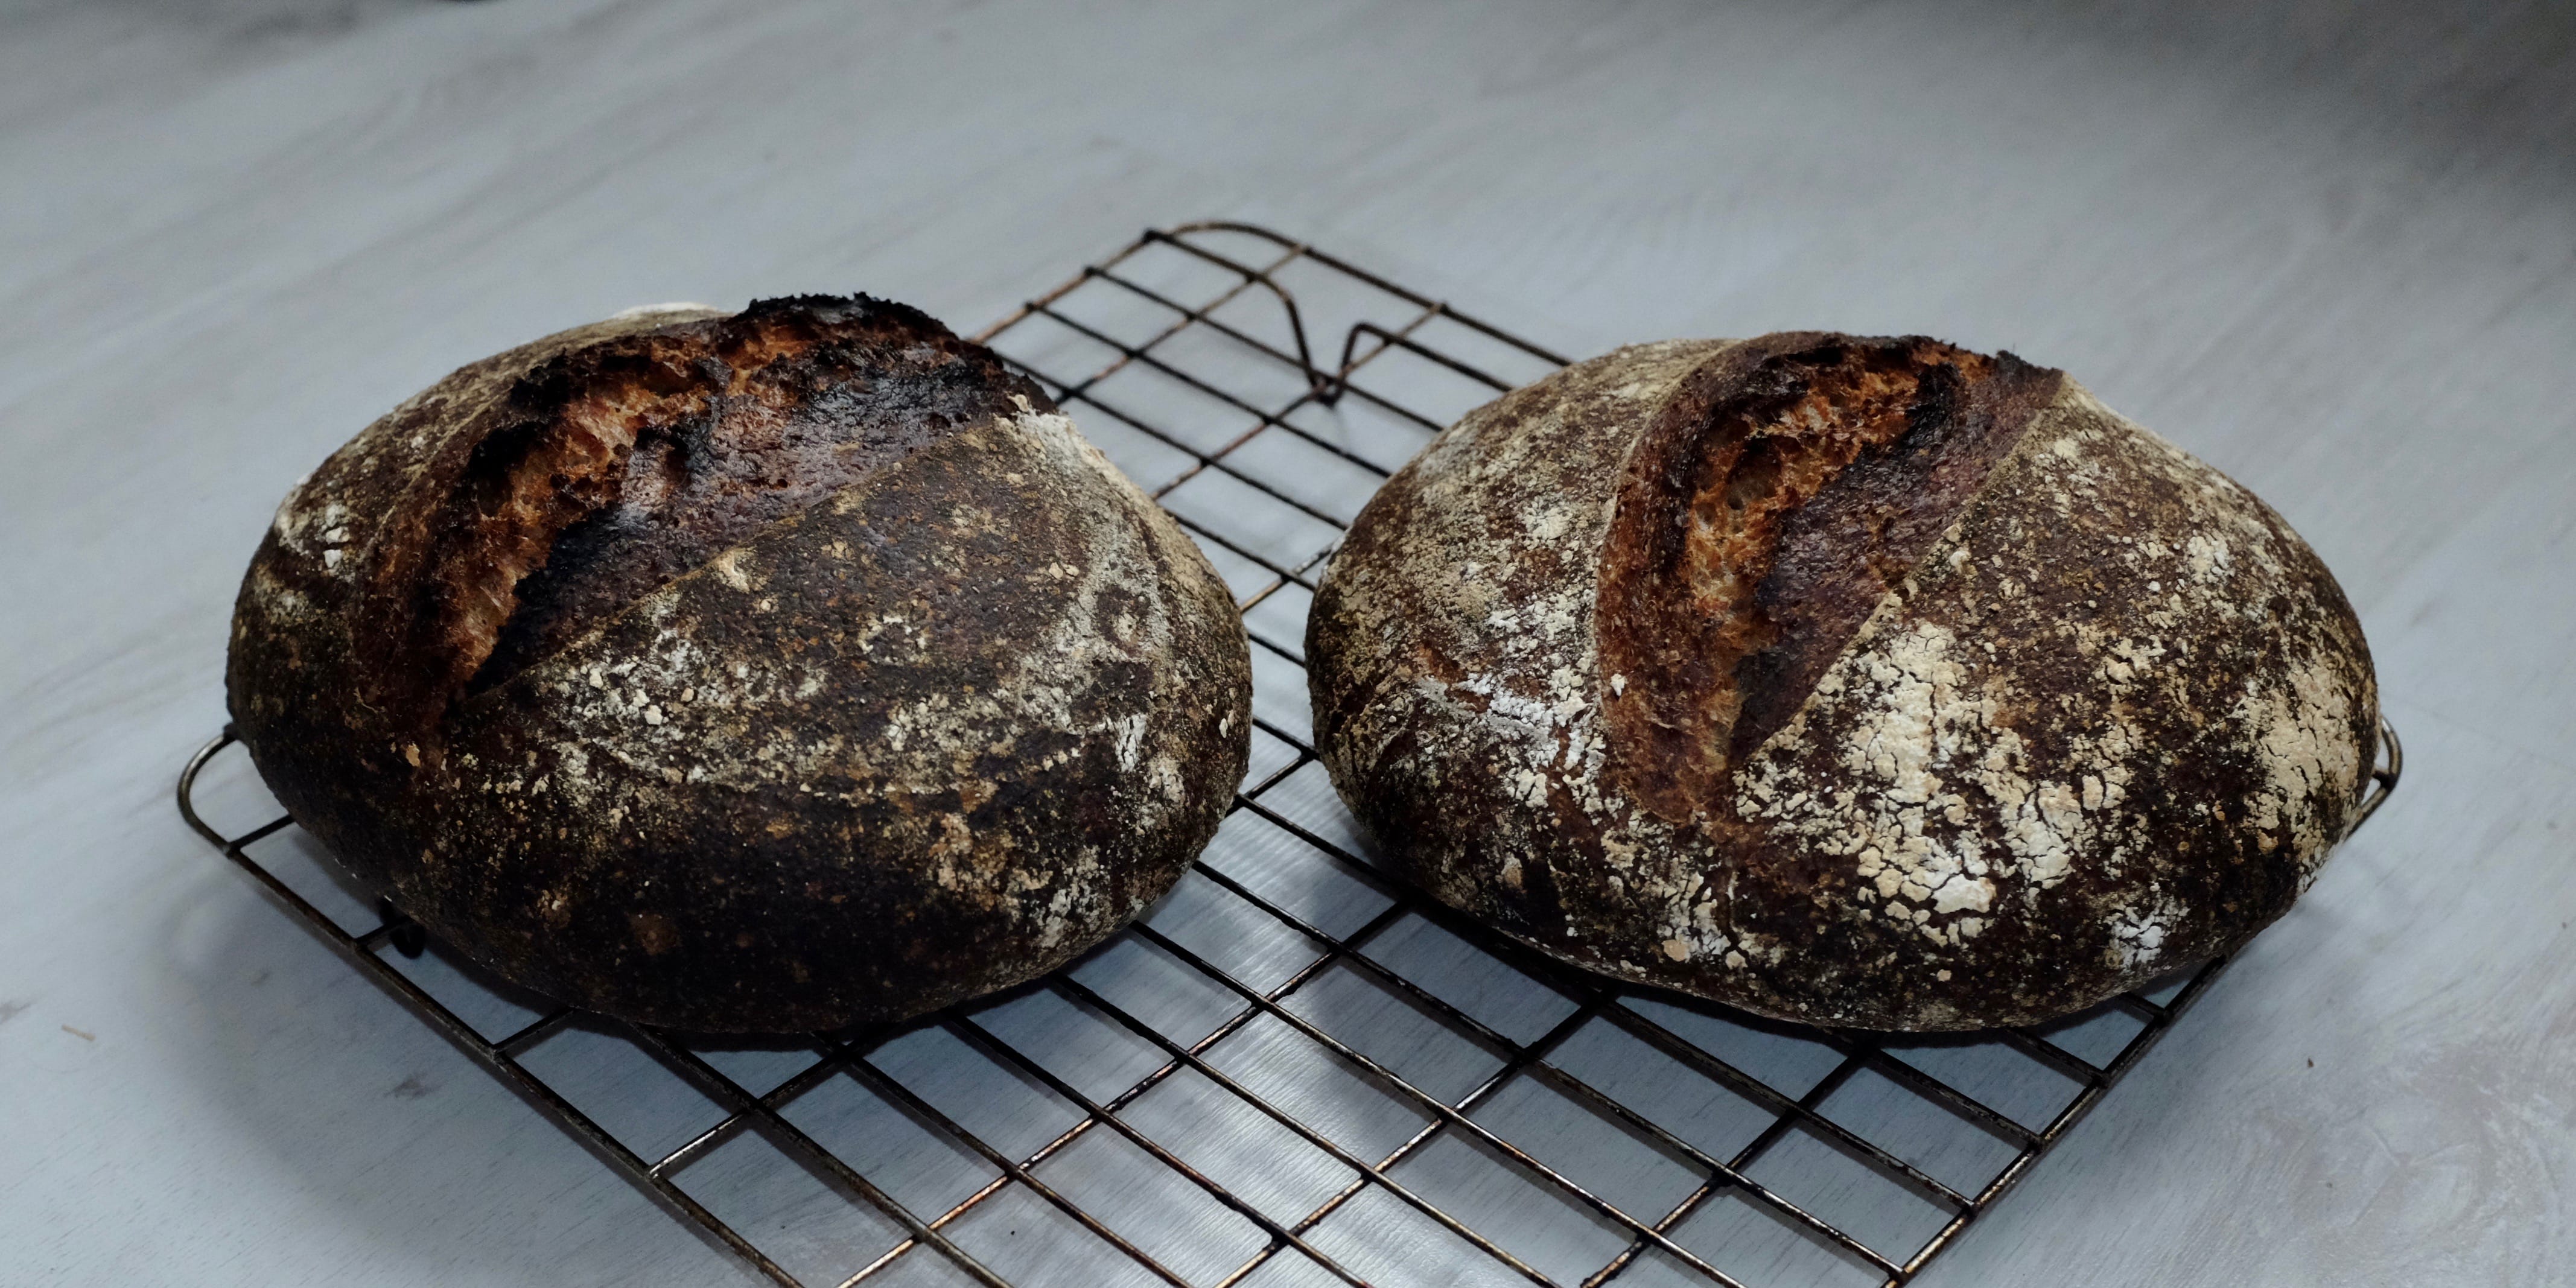 An image of a bread called “Young(er) Leaven Wholemeal & Rye”